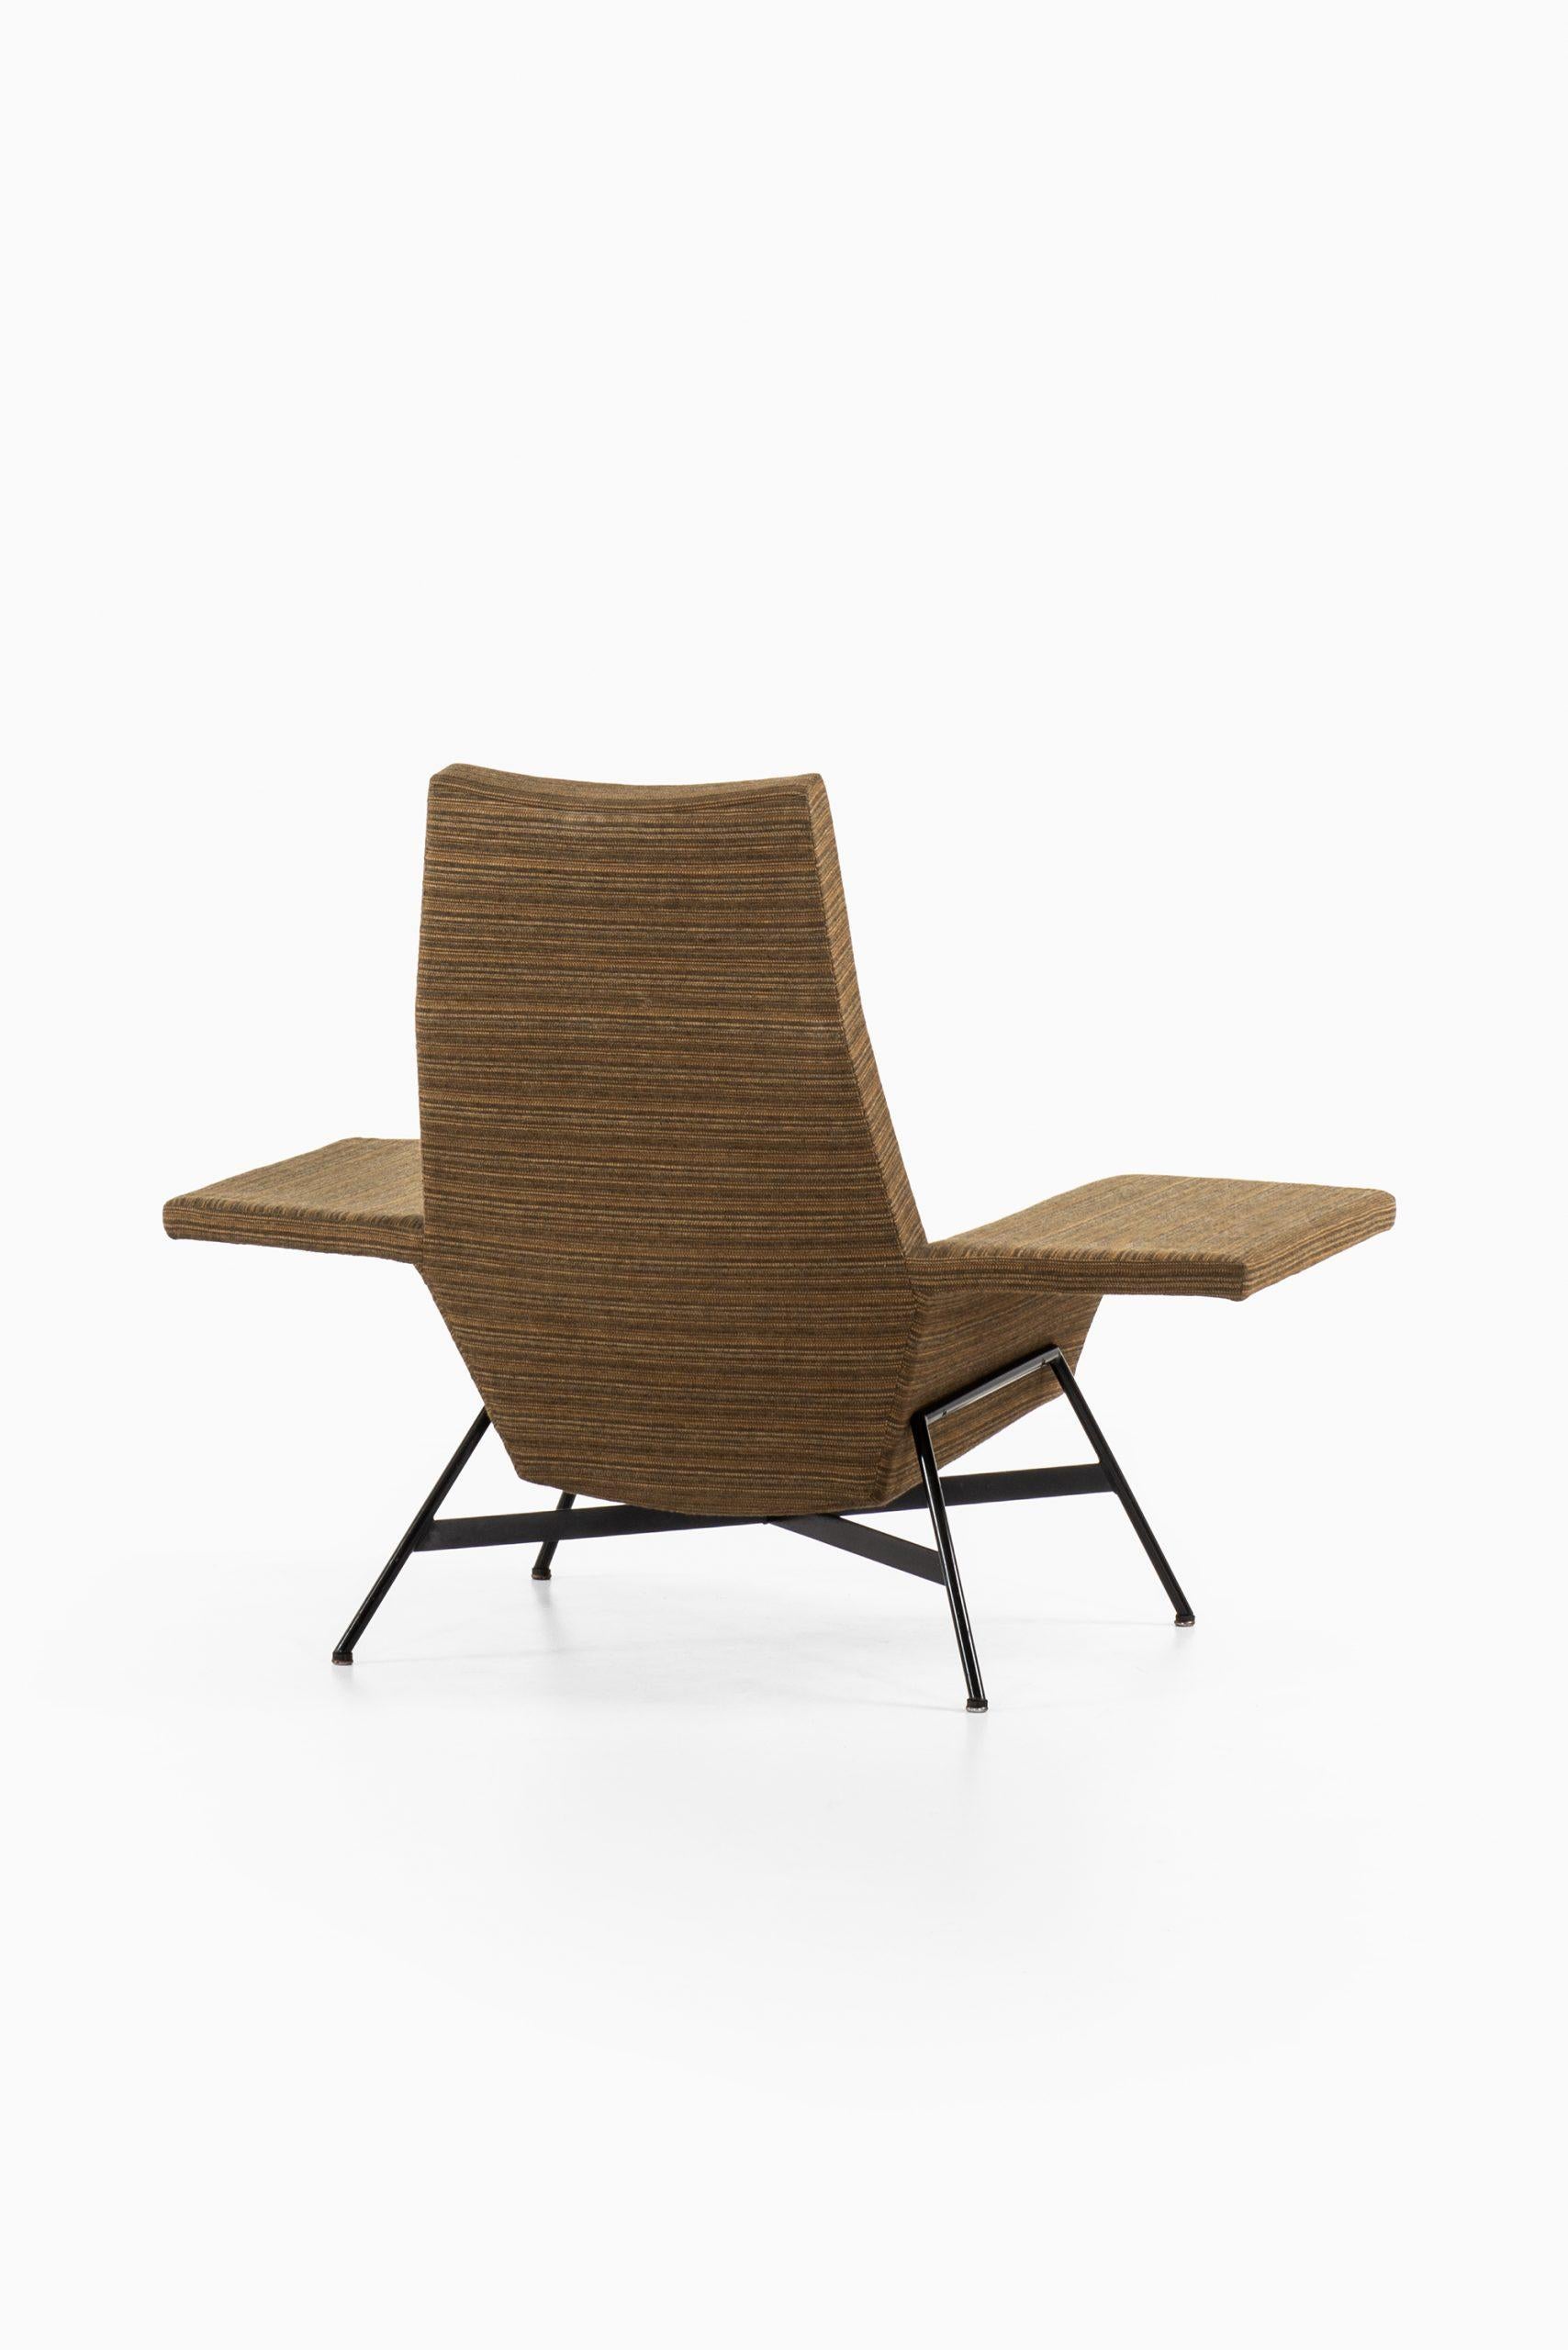 Otto Kolbe Easy Chair Produced by Walter Knoll in America For Sale 3